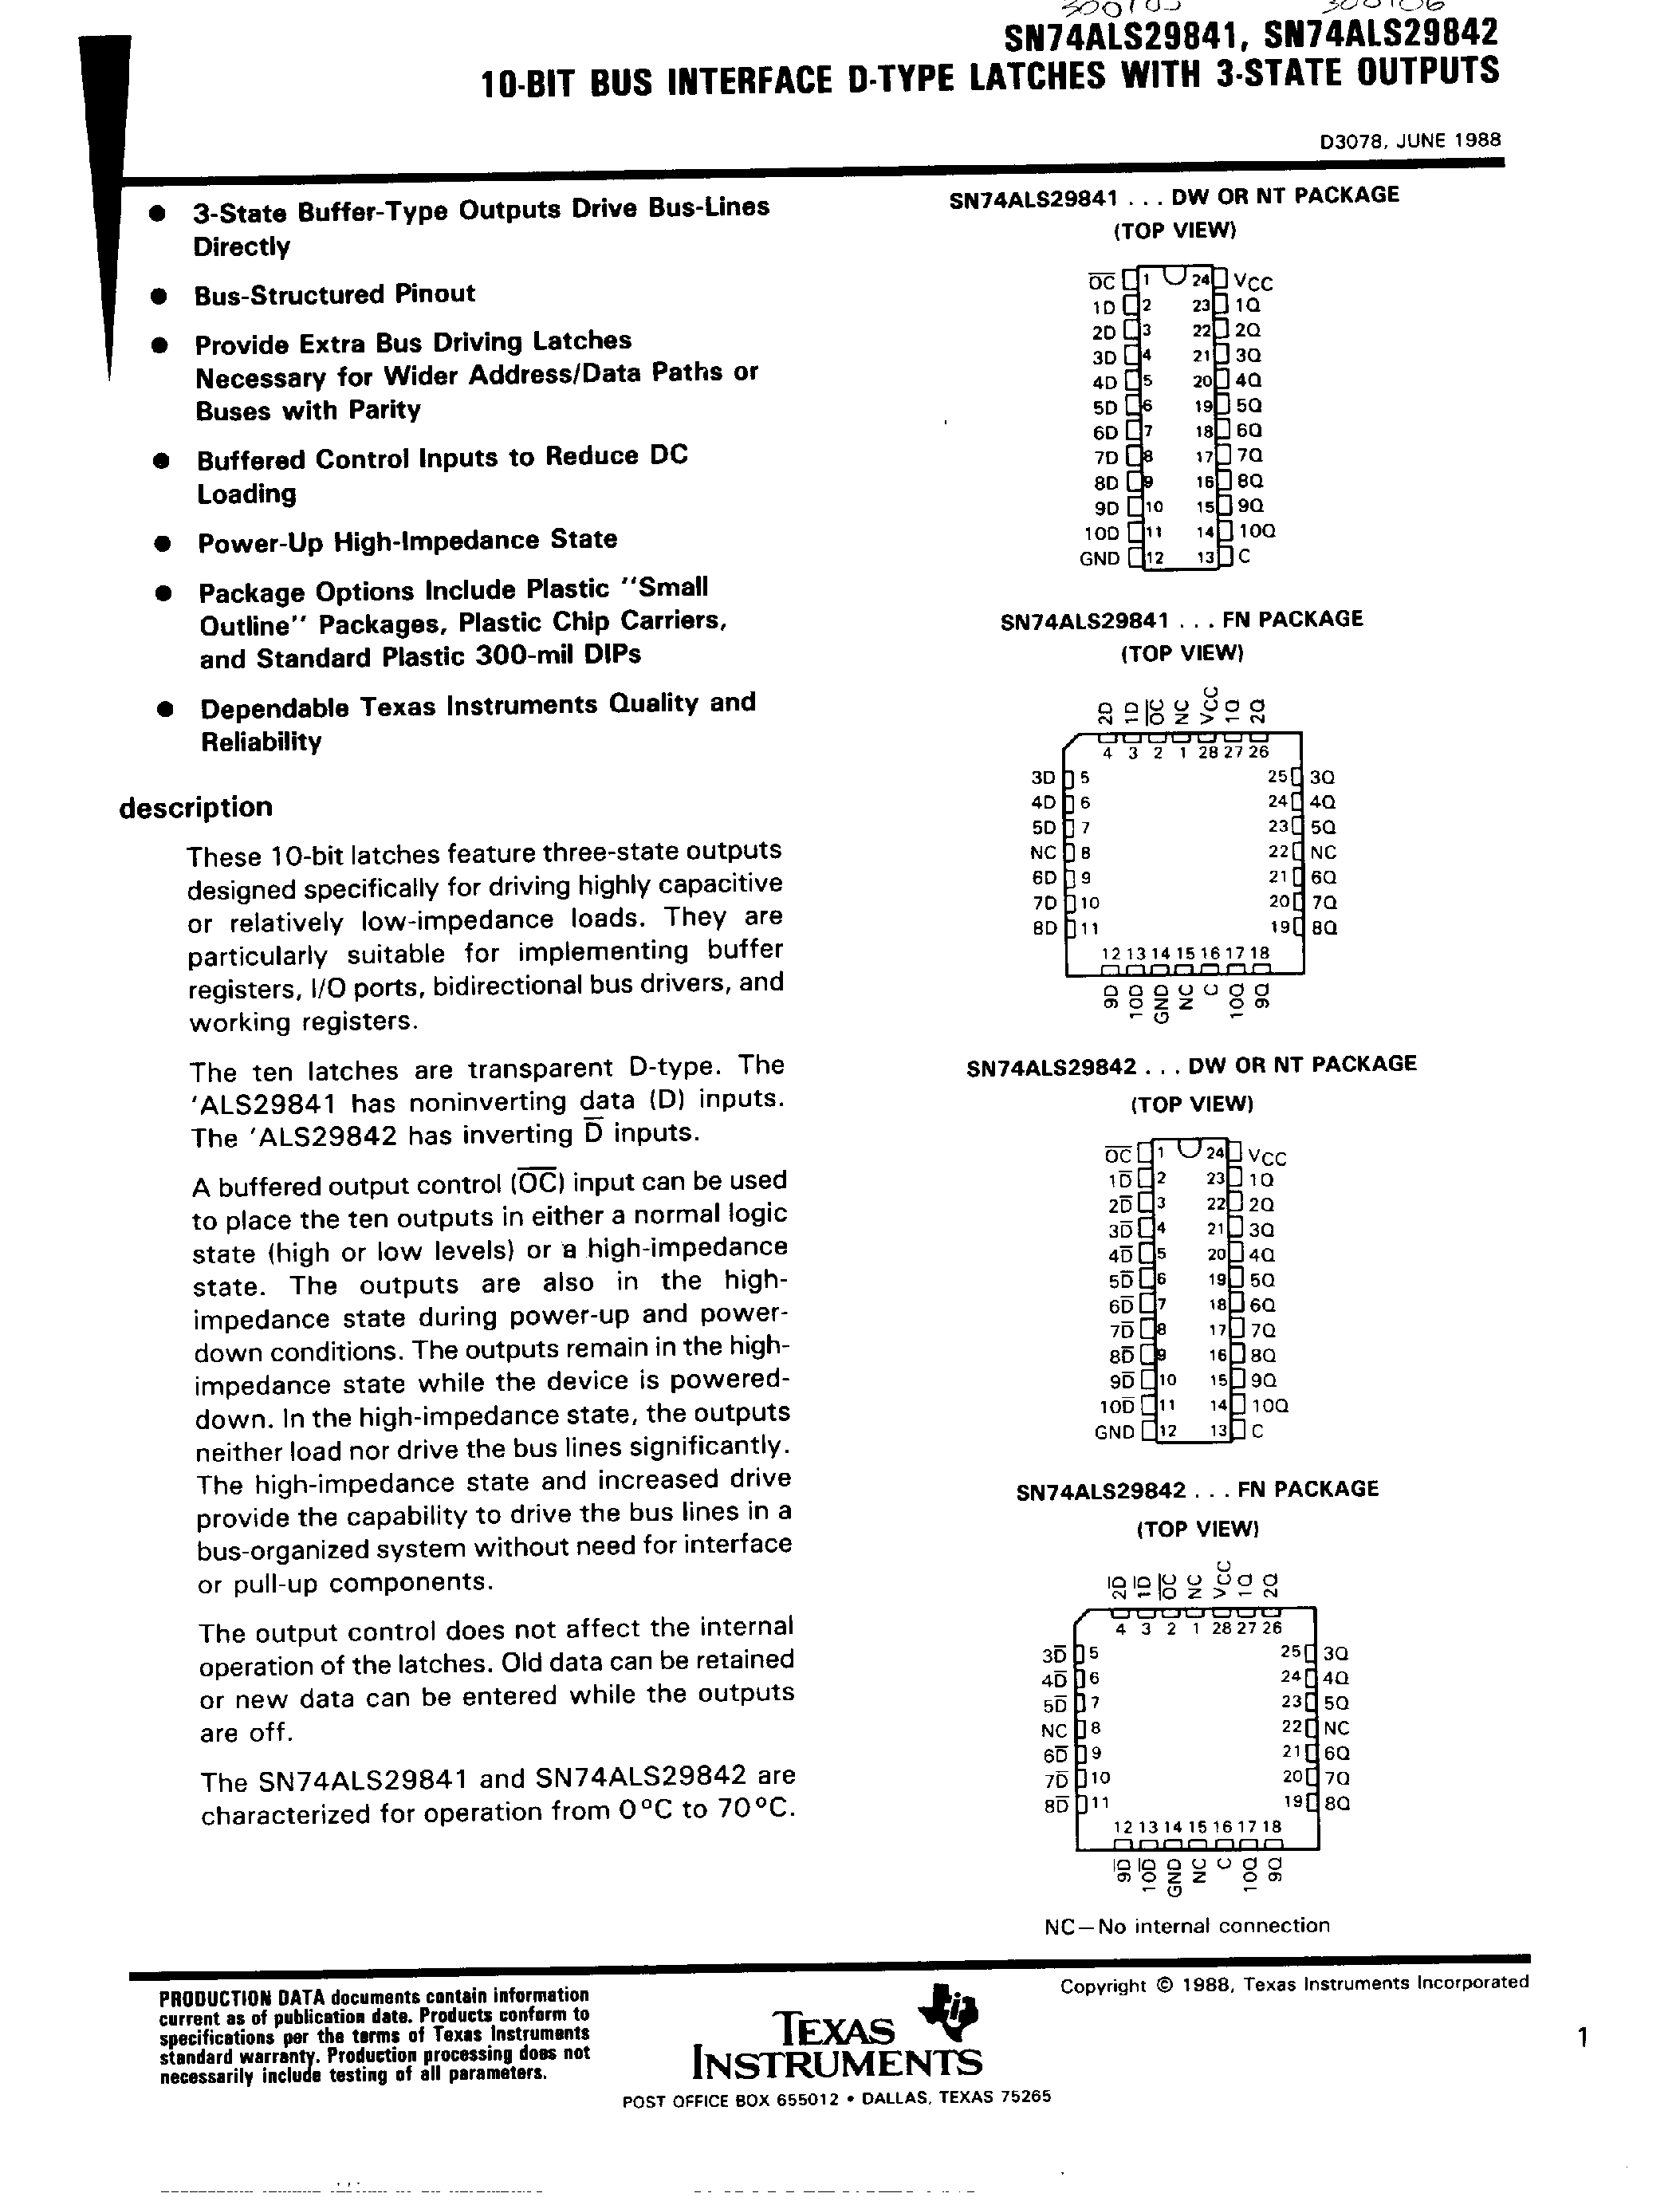 Datasheet SN74ALS29842 - (SN74ALS29841) 10 Bit Bus Interface D Type Latches with 3 State Outputs page 1